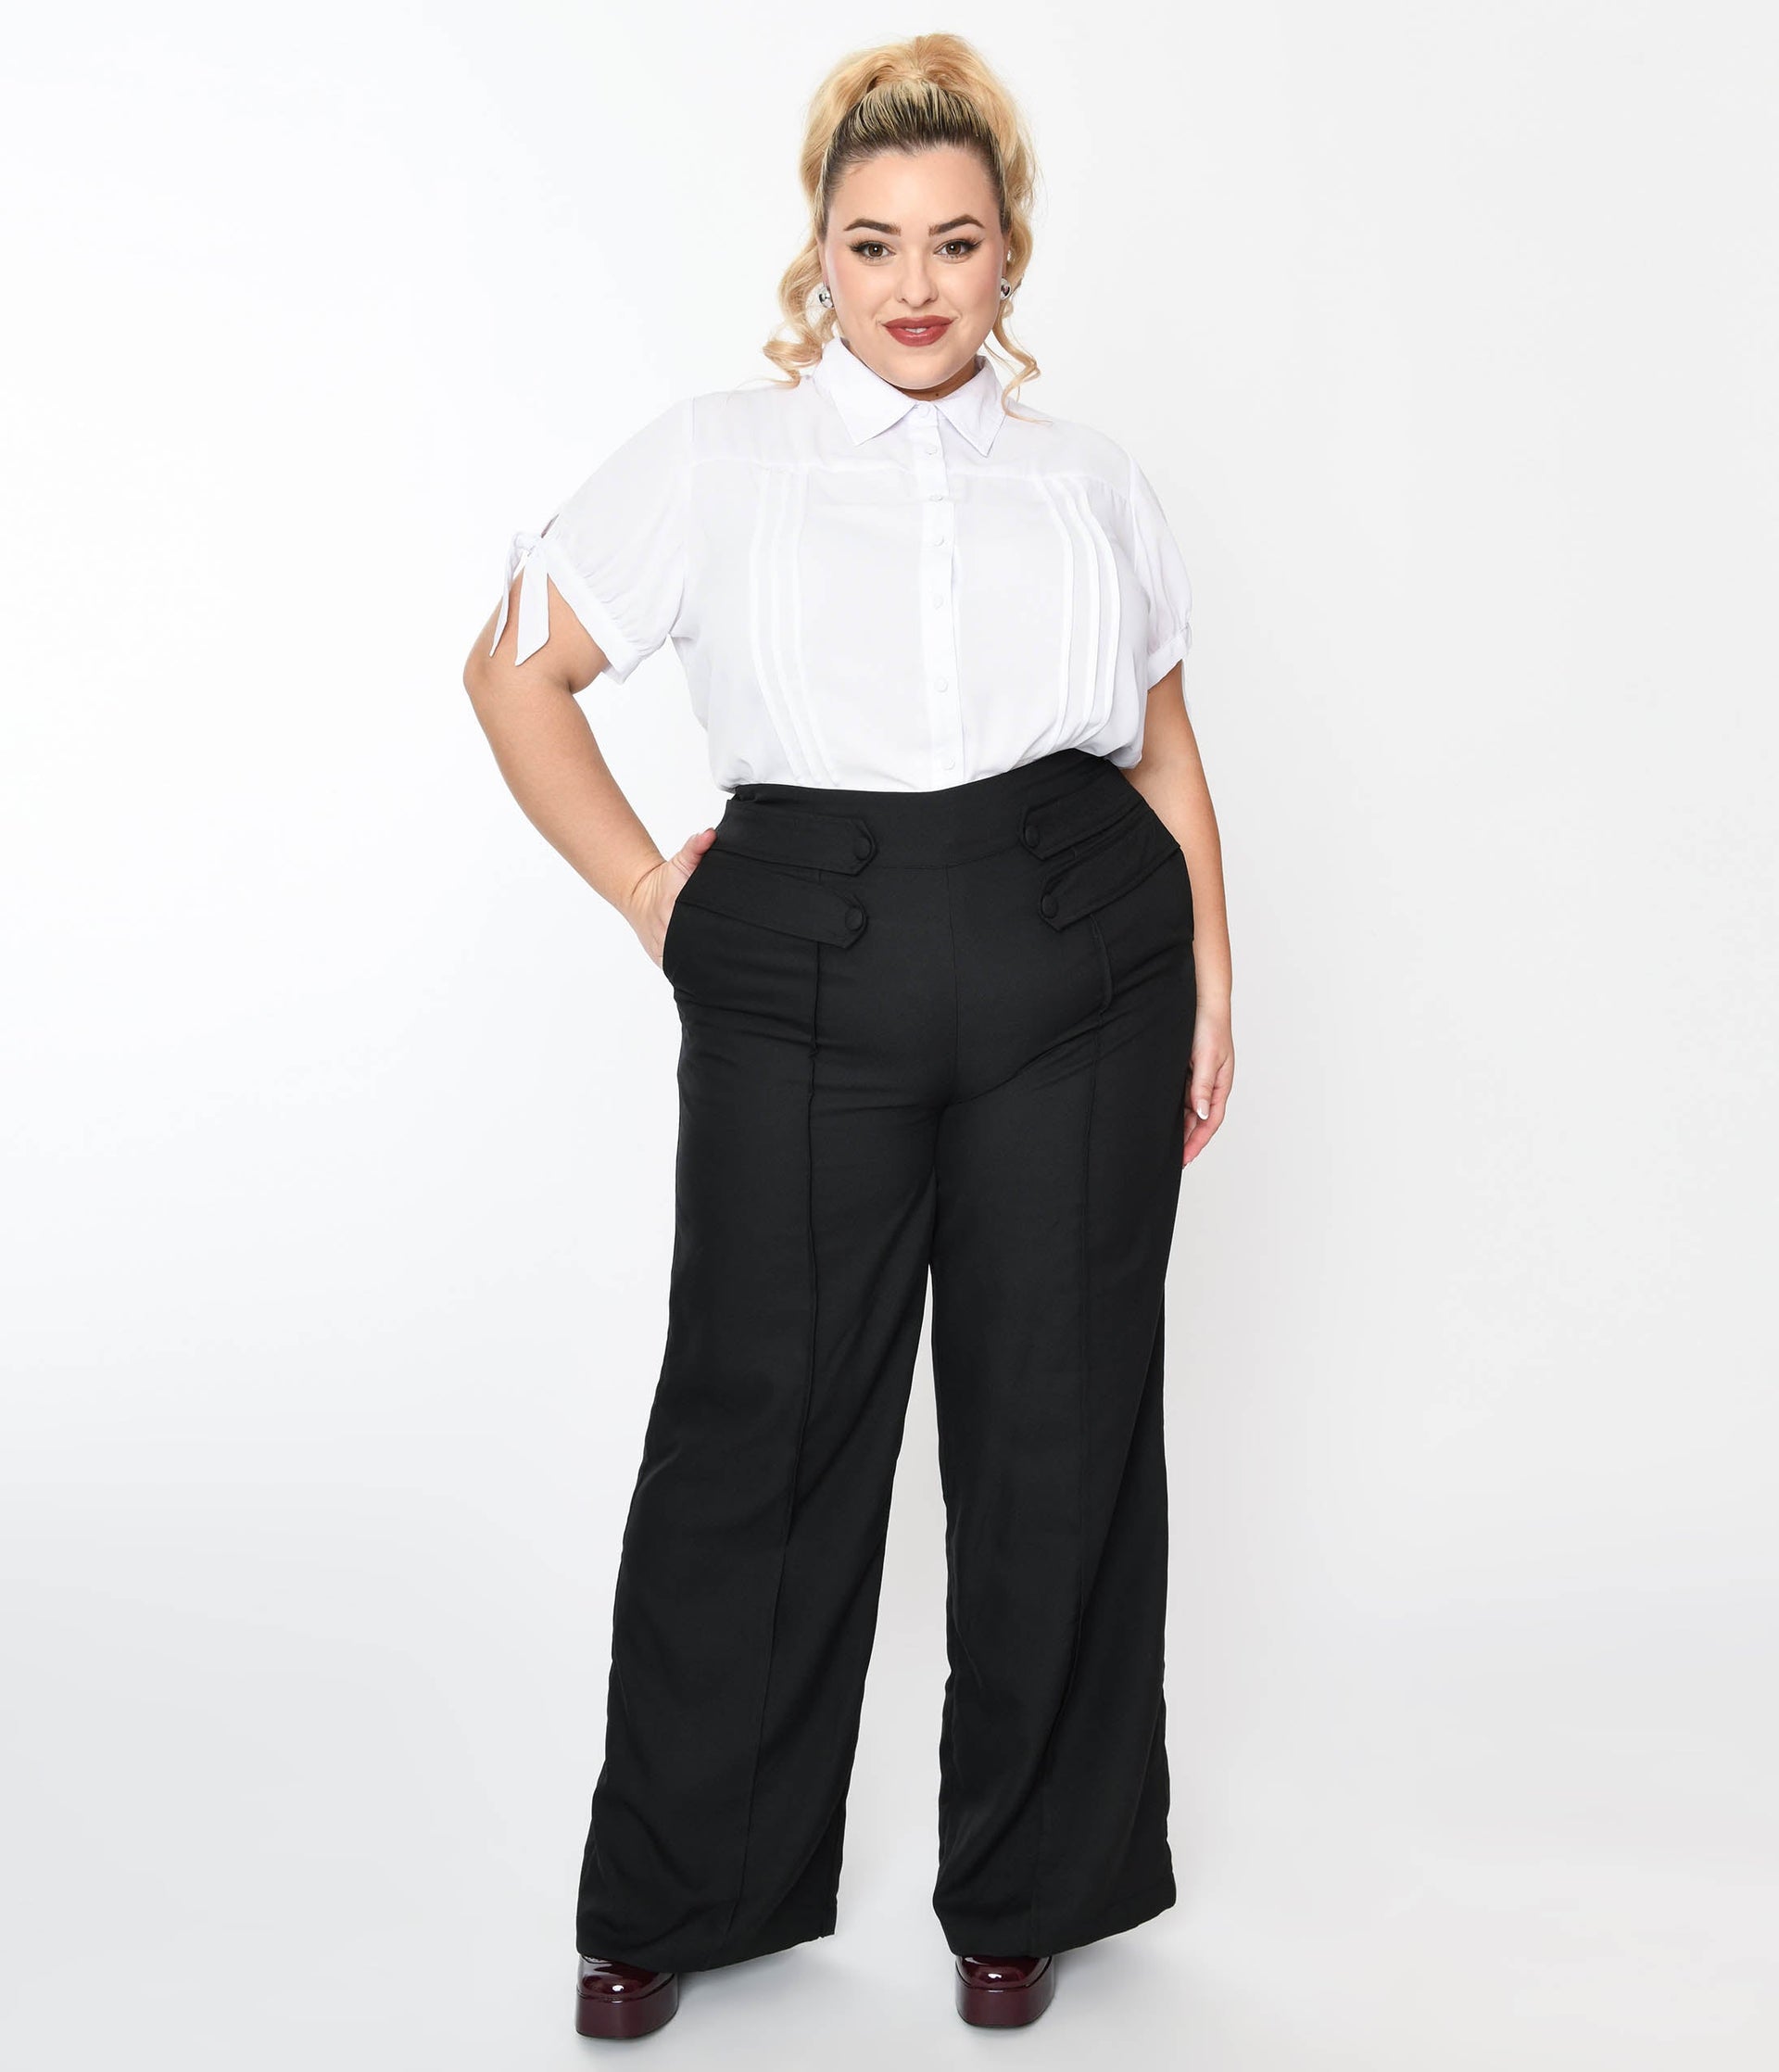 Wide Leg TROUSERS - 1940s 1950s retro vintage style - Flared, high